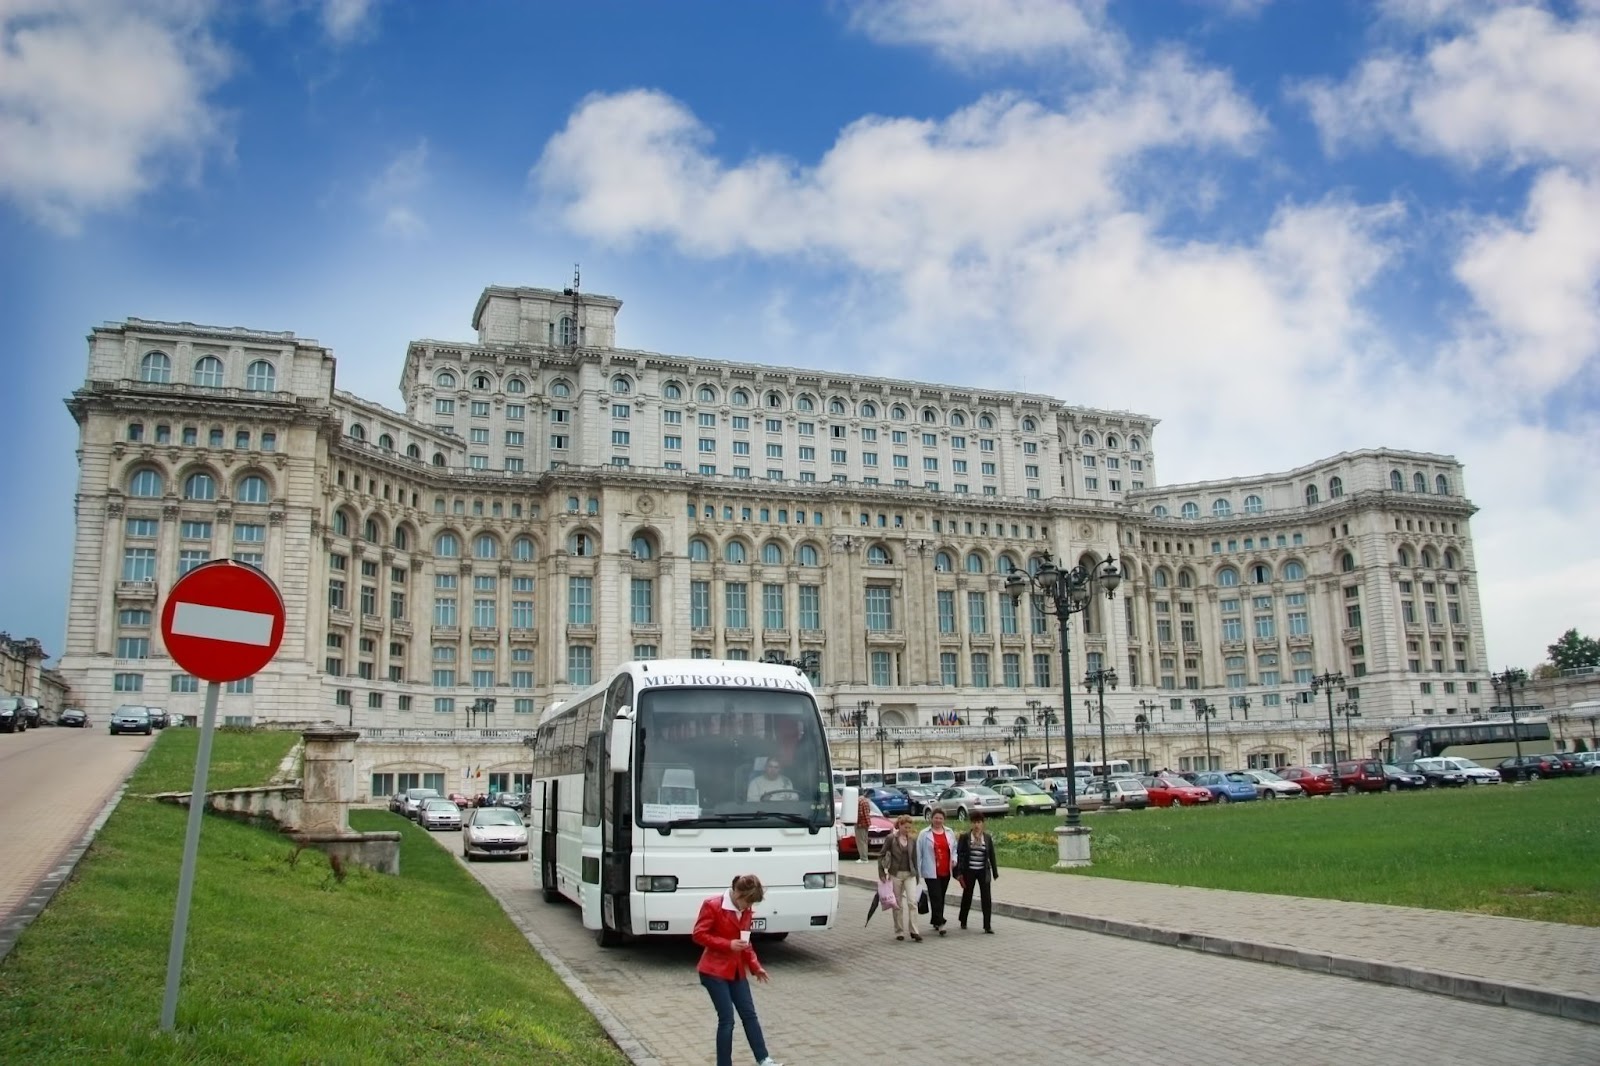 Sightseeing bus leaves from the Palace of the Parliament